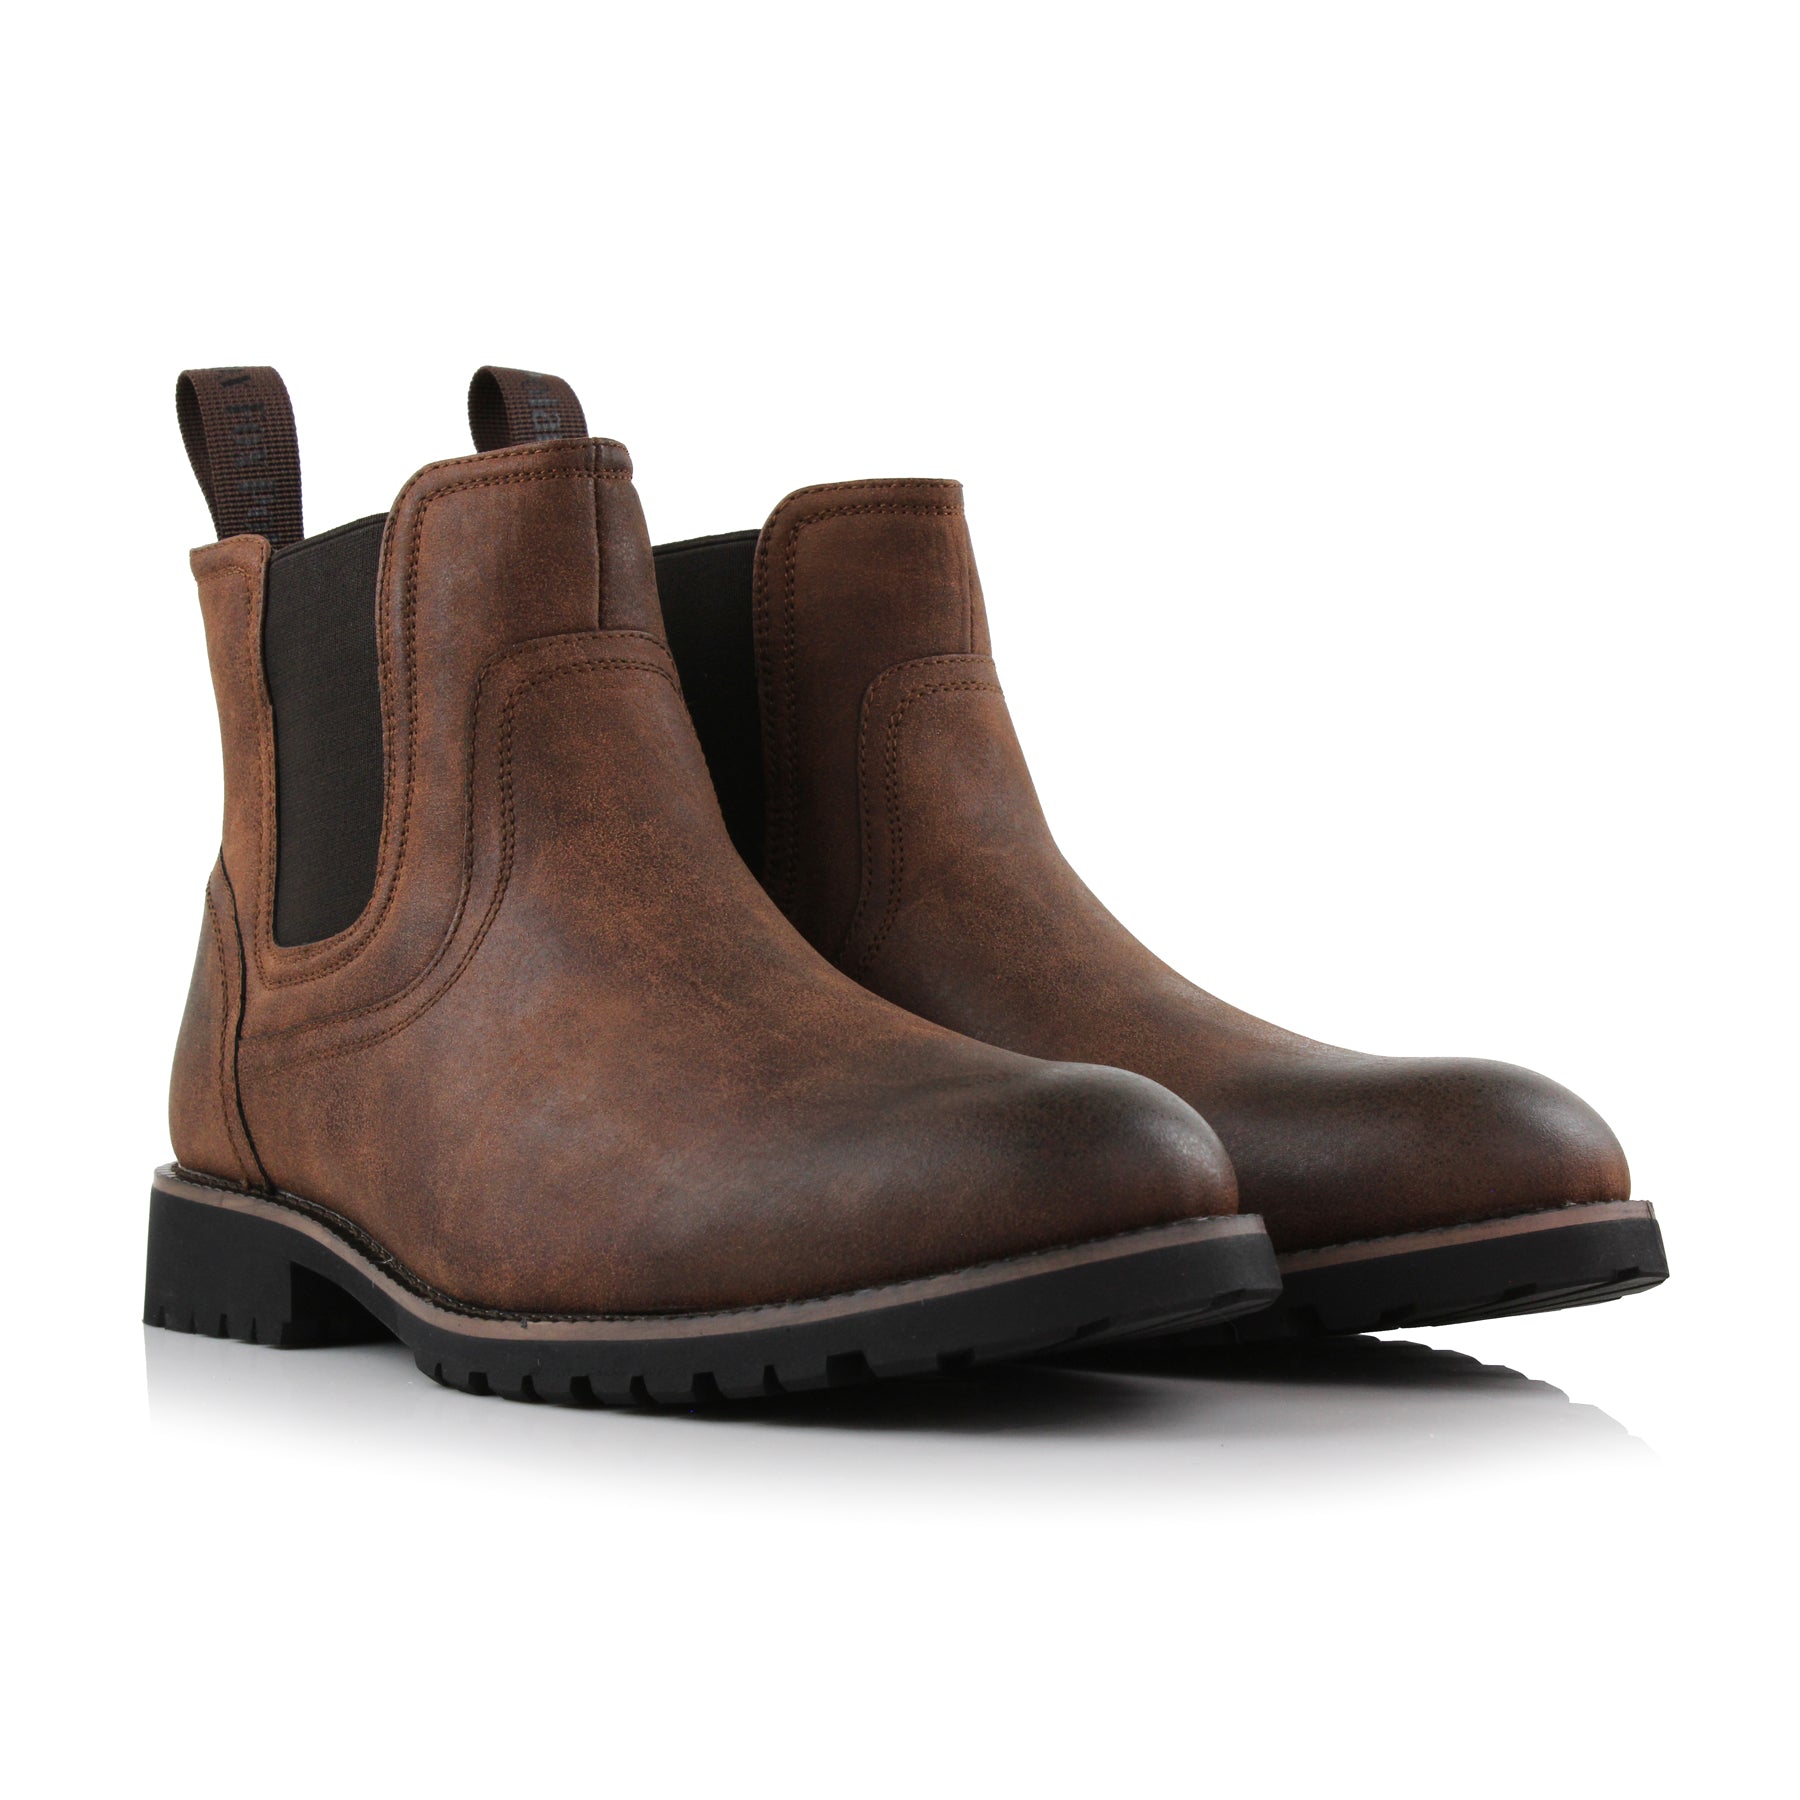 Western Style Chelsea Boots | Duncan by Polar Fox | Conal Footwear | Paired Angle View